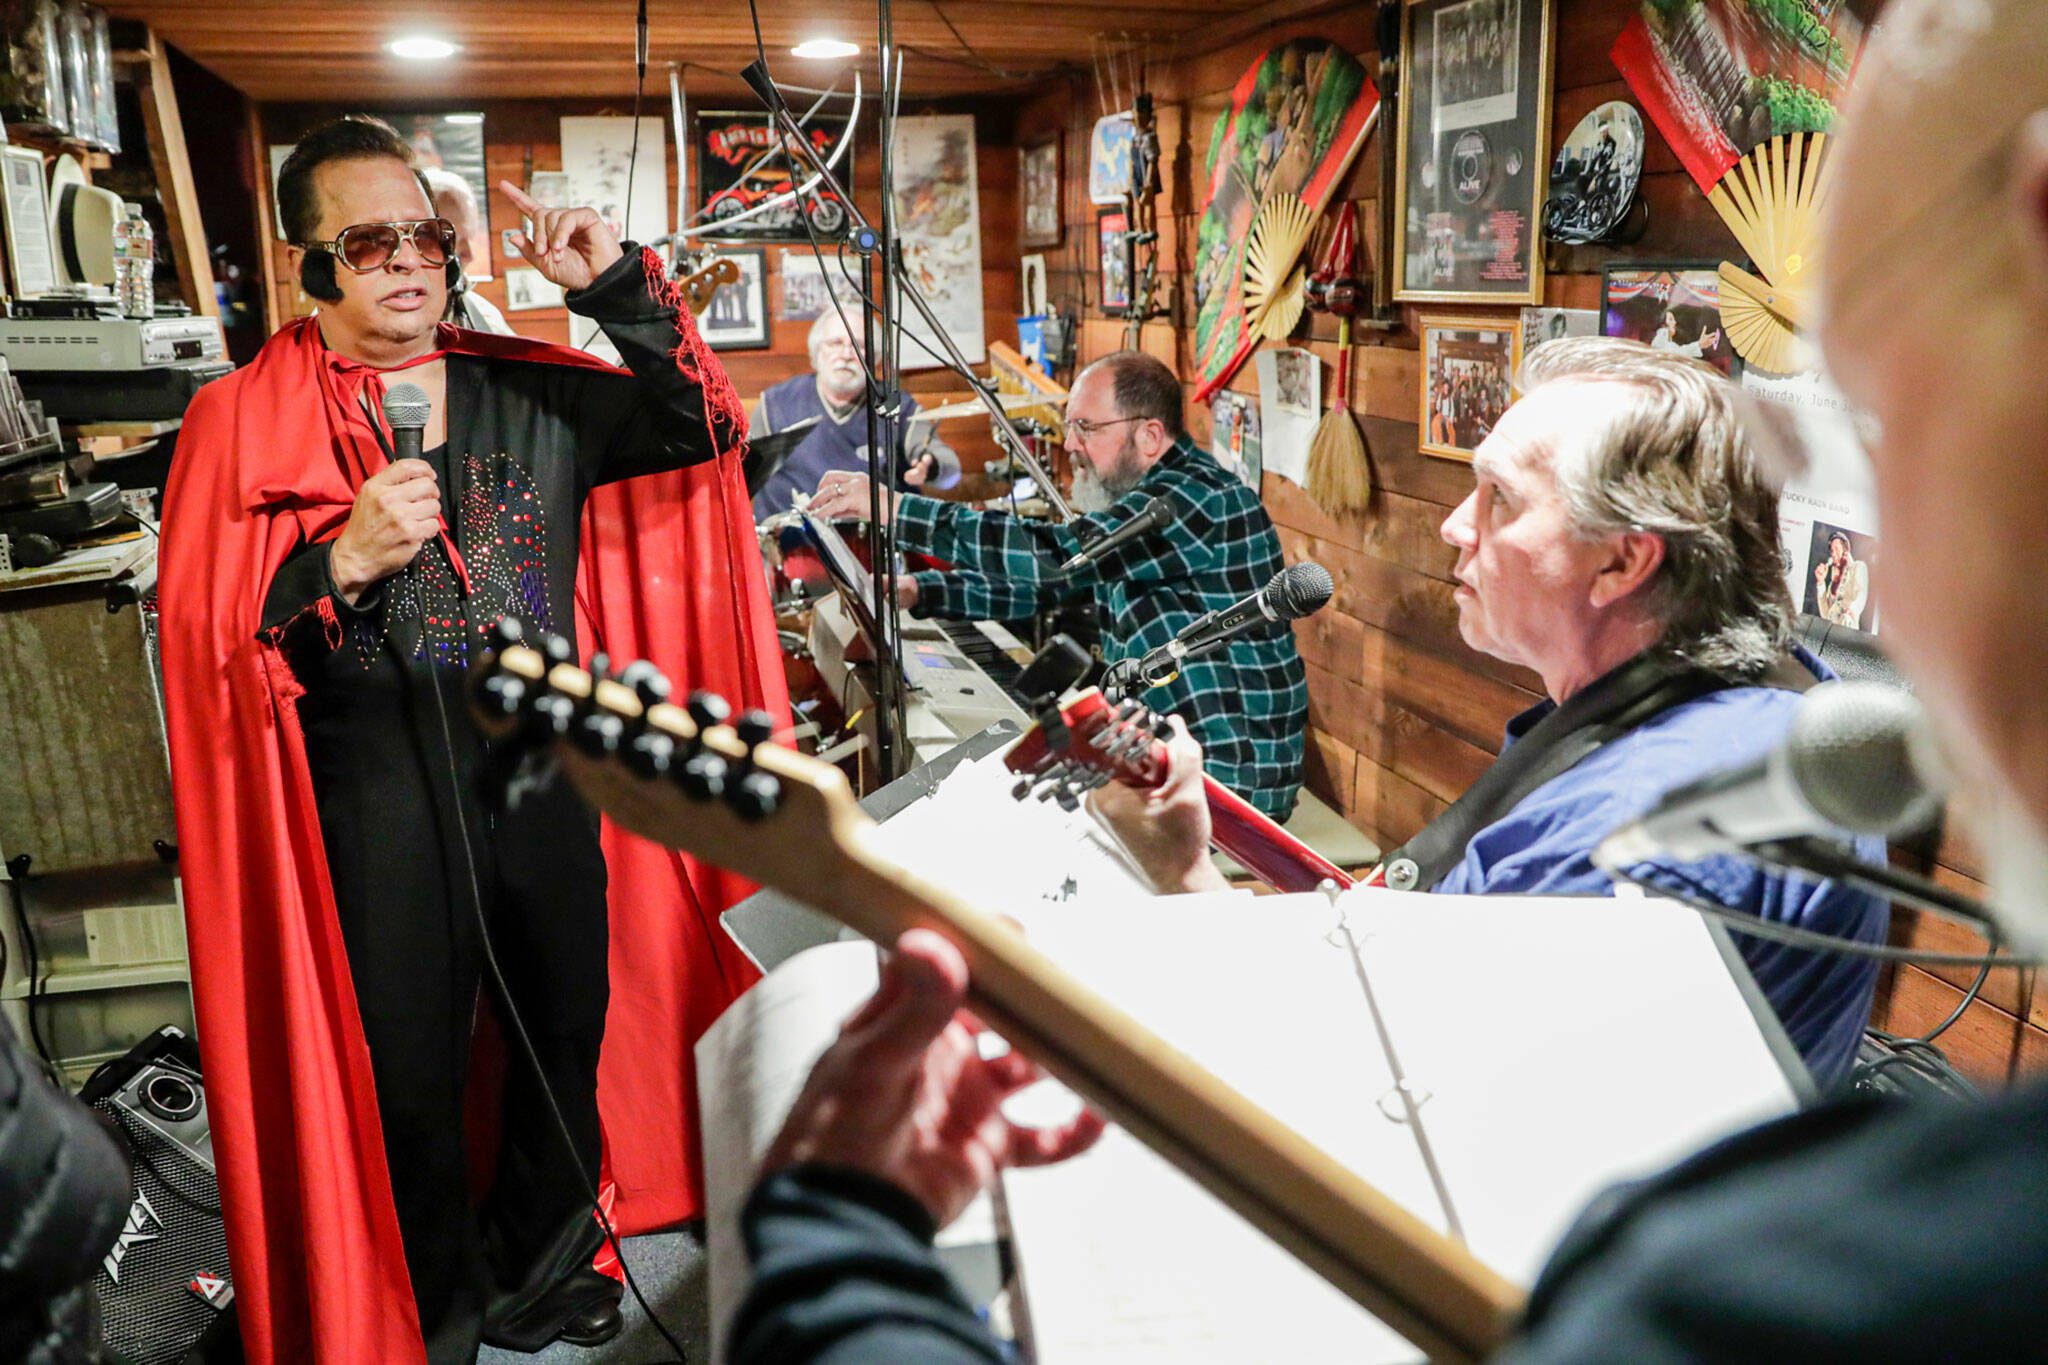 Gus Mansour works through timing with Kentucky Rain Band members Jeff Olson and Steven Preszler, far right, during a rehearsal for the Elvis Challenge in Everett on April 13, 2022. (Kevin Clark / The Herald)